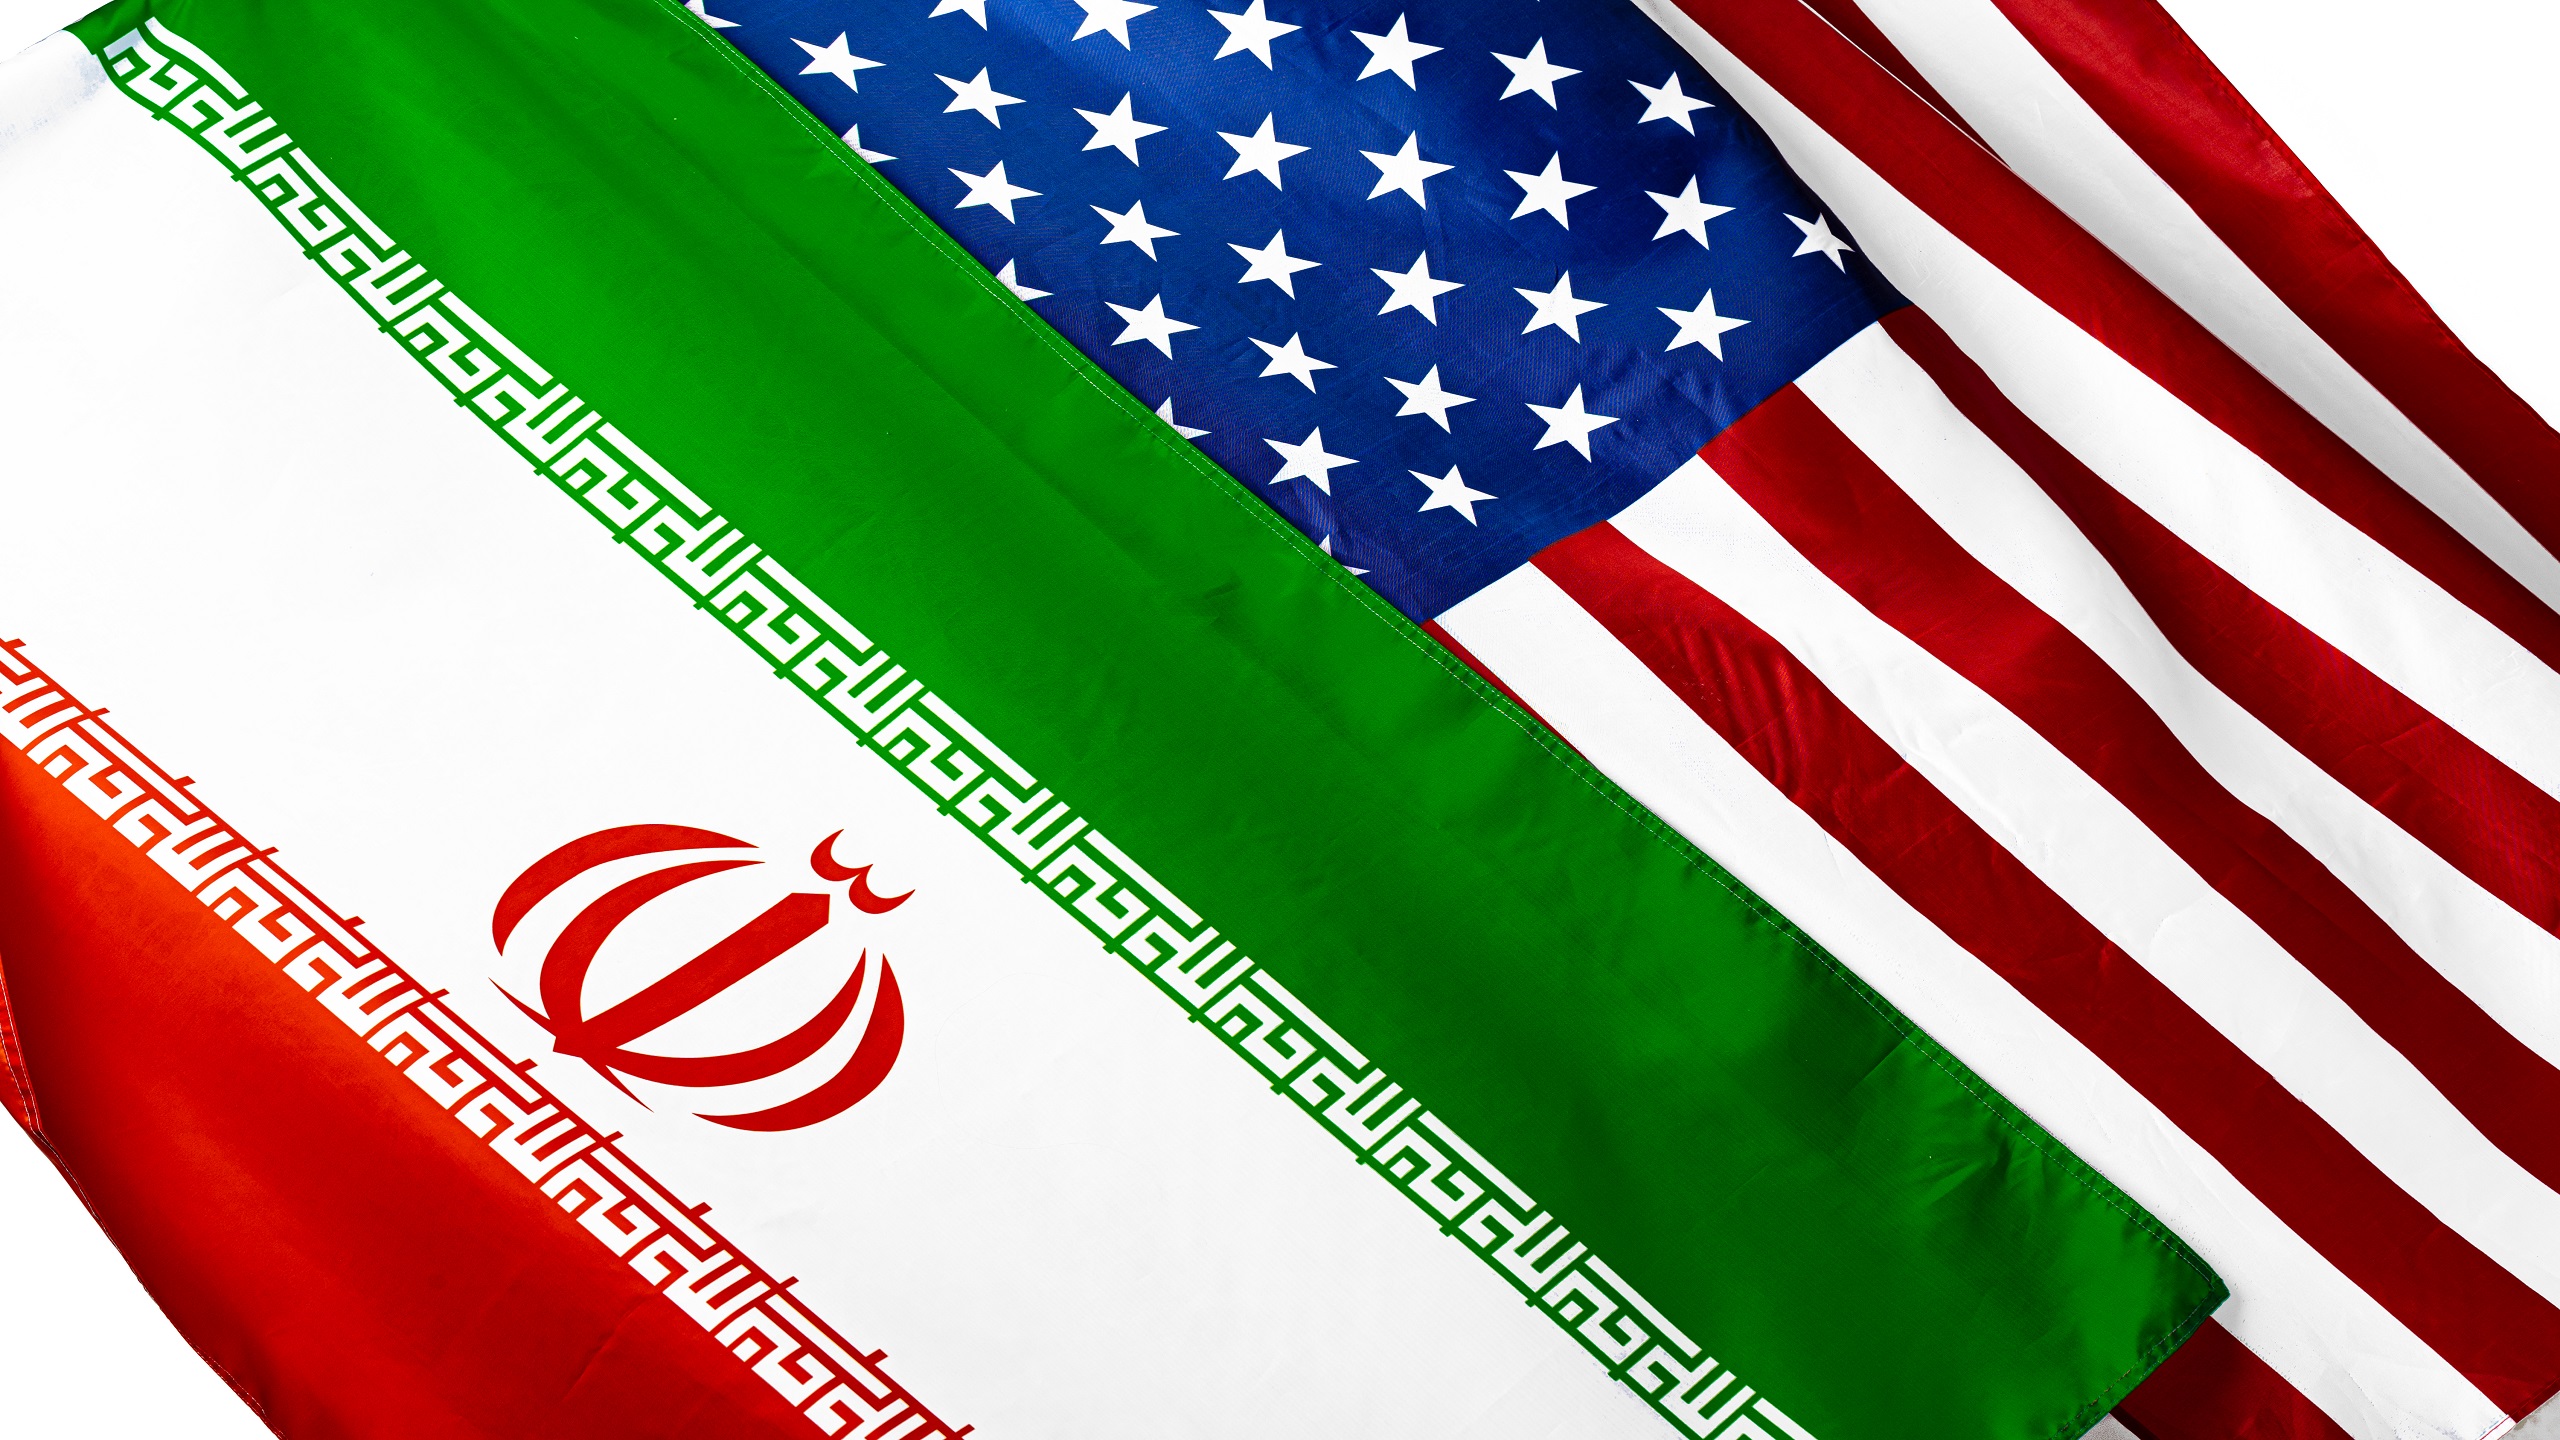 Tehran Names 5 Iranians for Prisoner Exchange With US Amid Ongoing Tensions